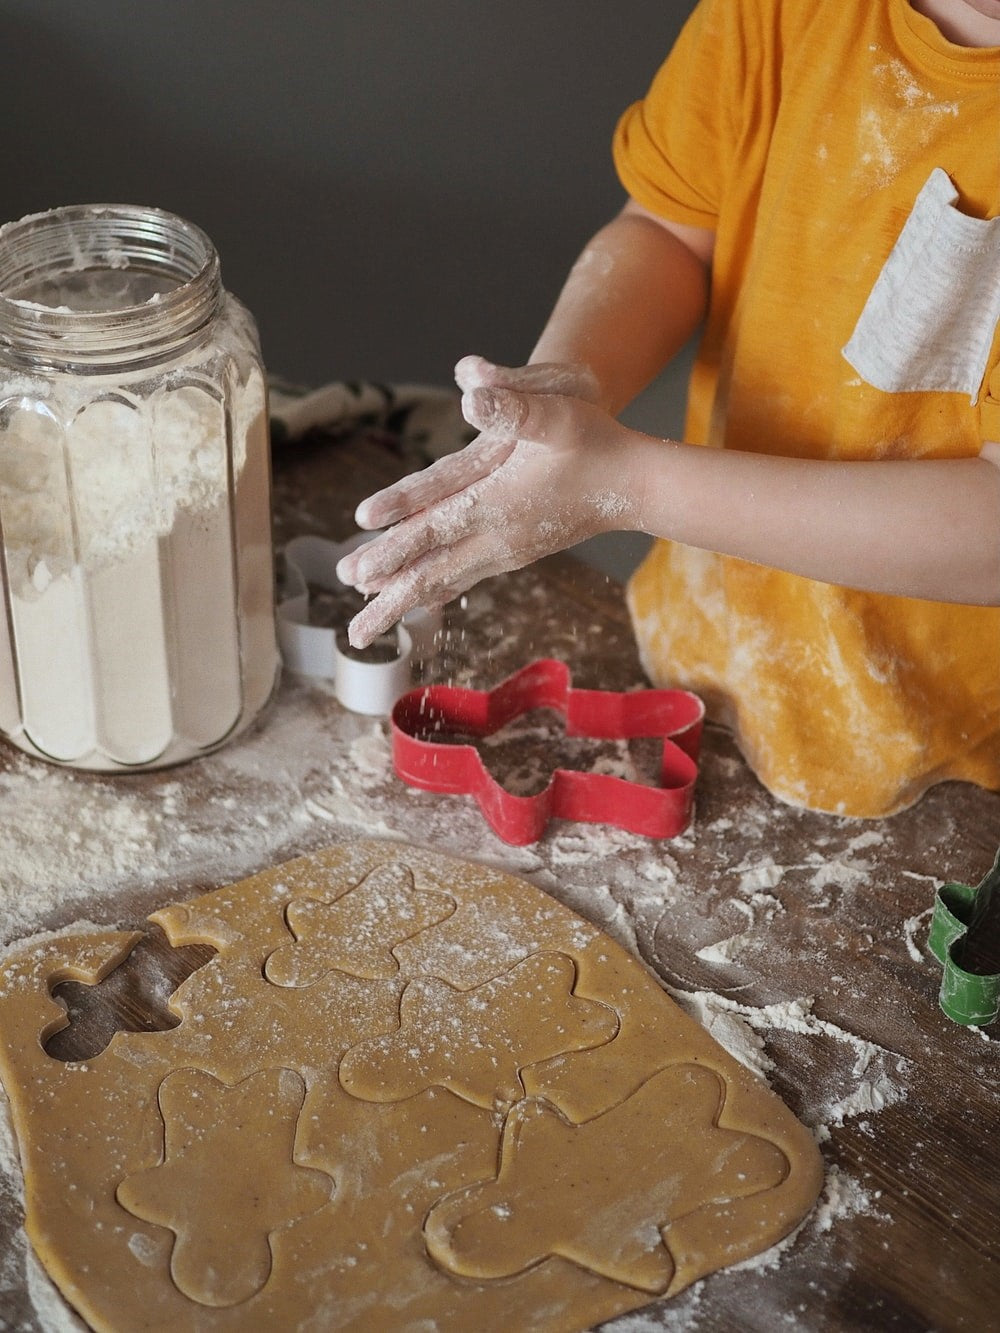 Child rubbing his hands in flour over raw cookies.